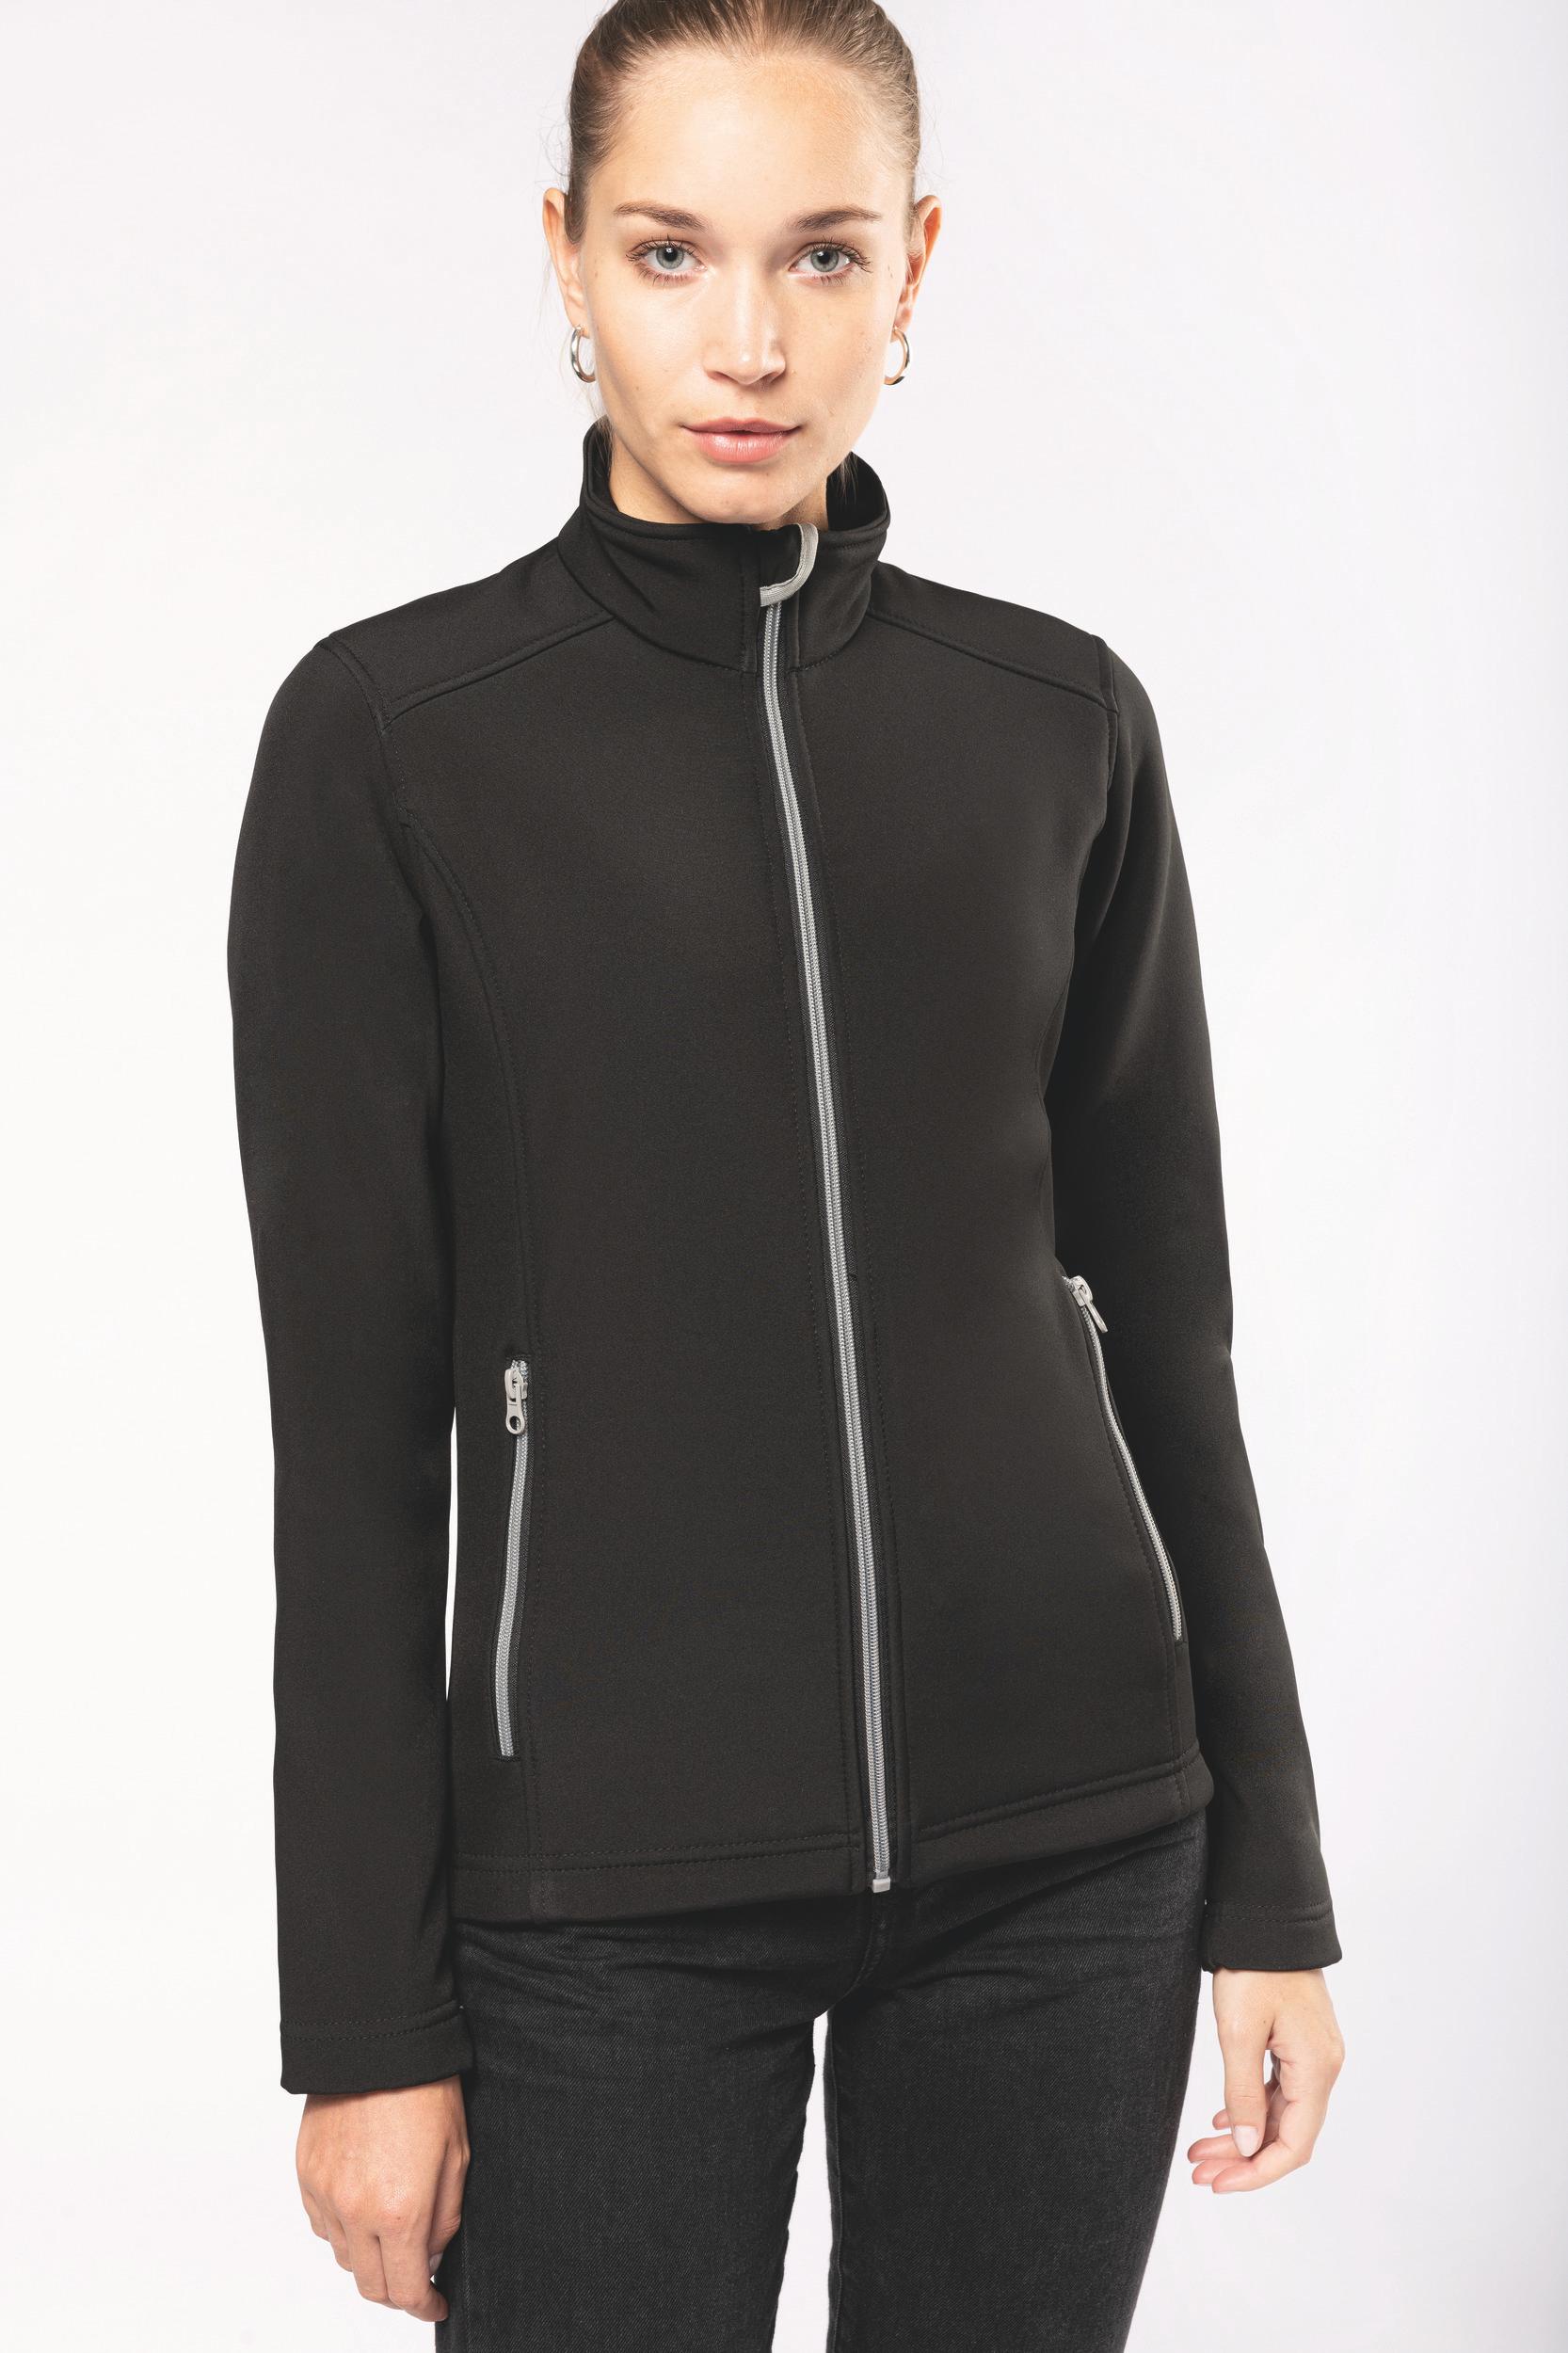 Veste Softshell femme 2 Couches